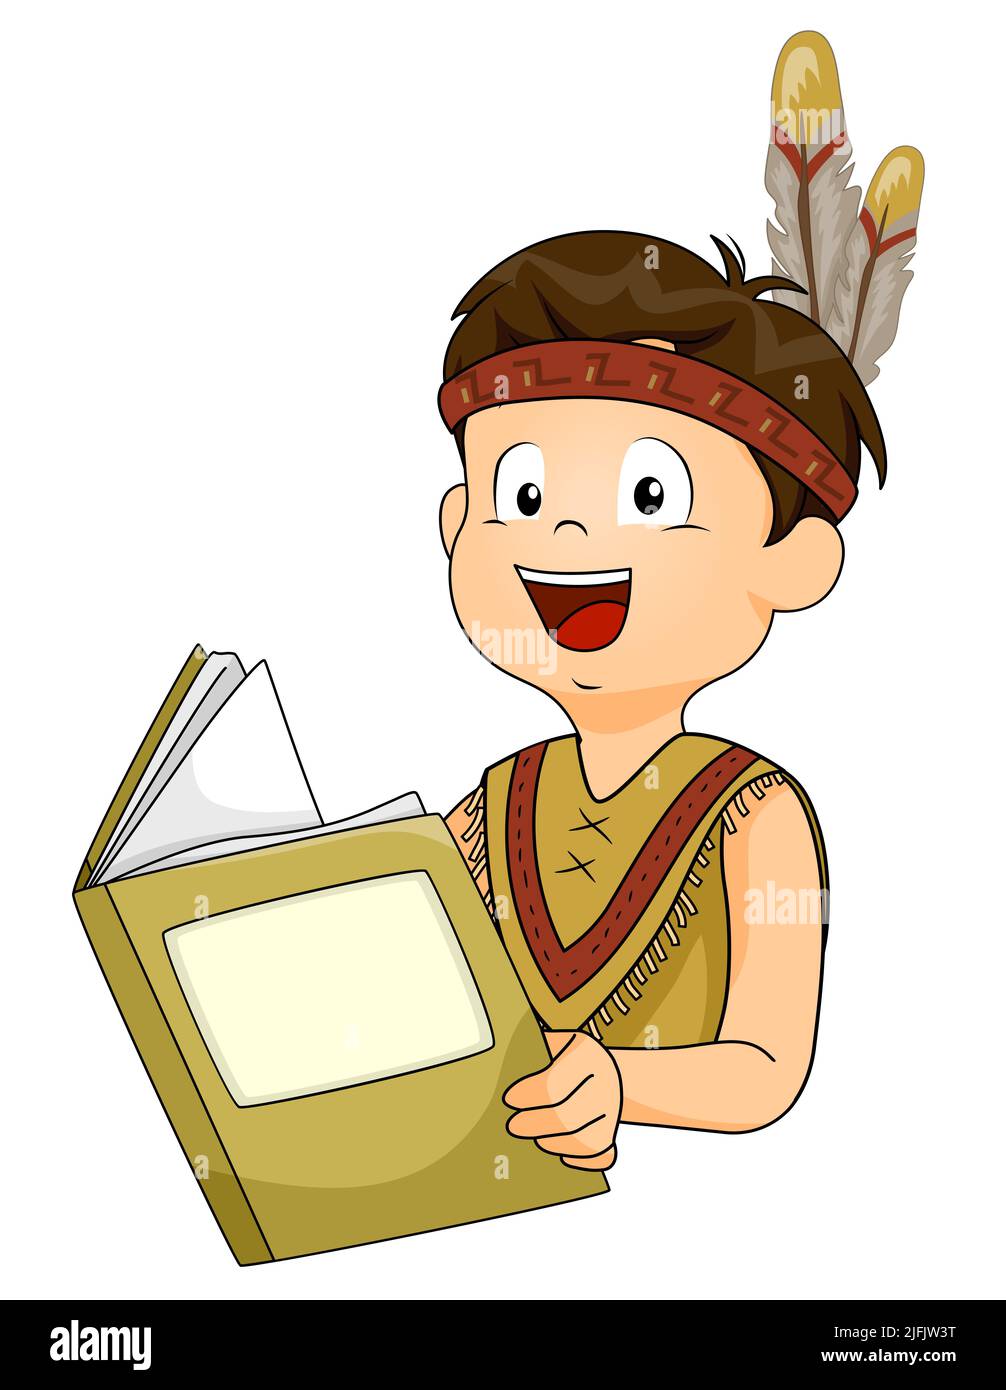 Illustration of Kid Boy Native Indian Student Wearing Tunic and Feathered Headband, Holding and Reading a Book Stock Photo